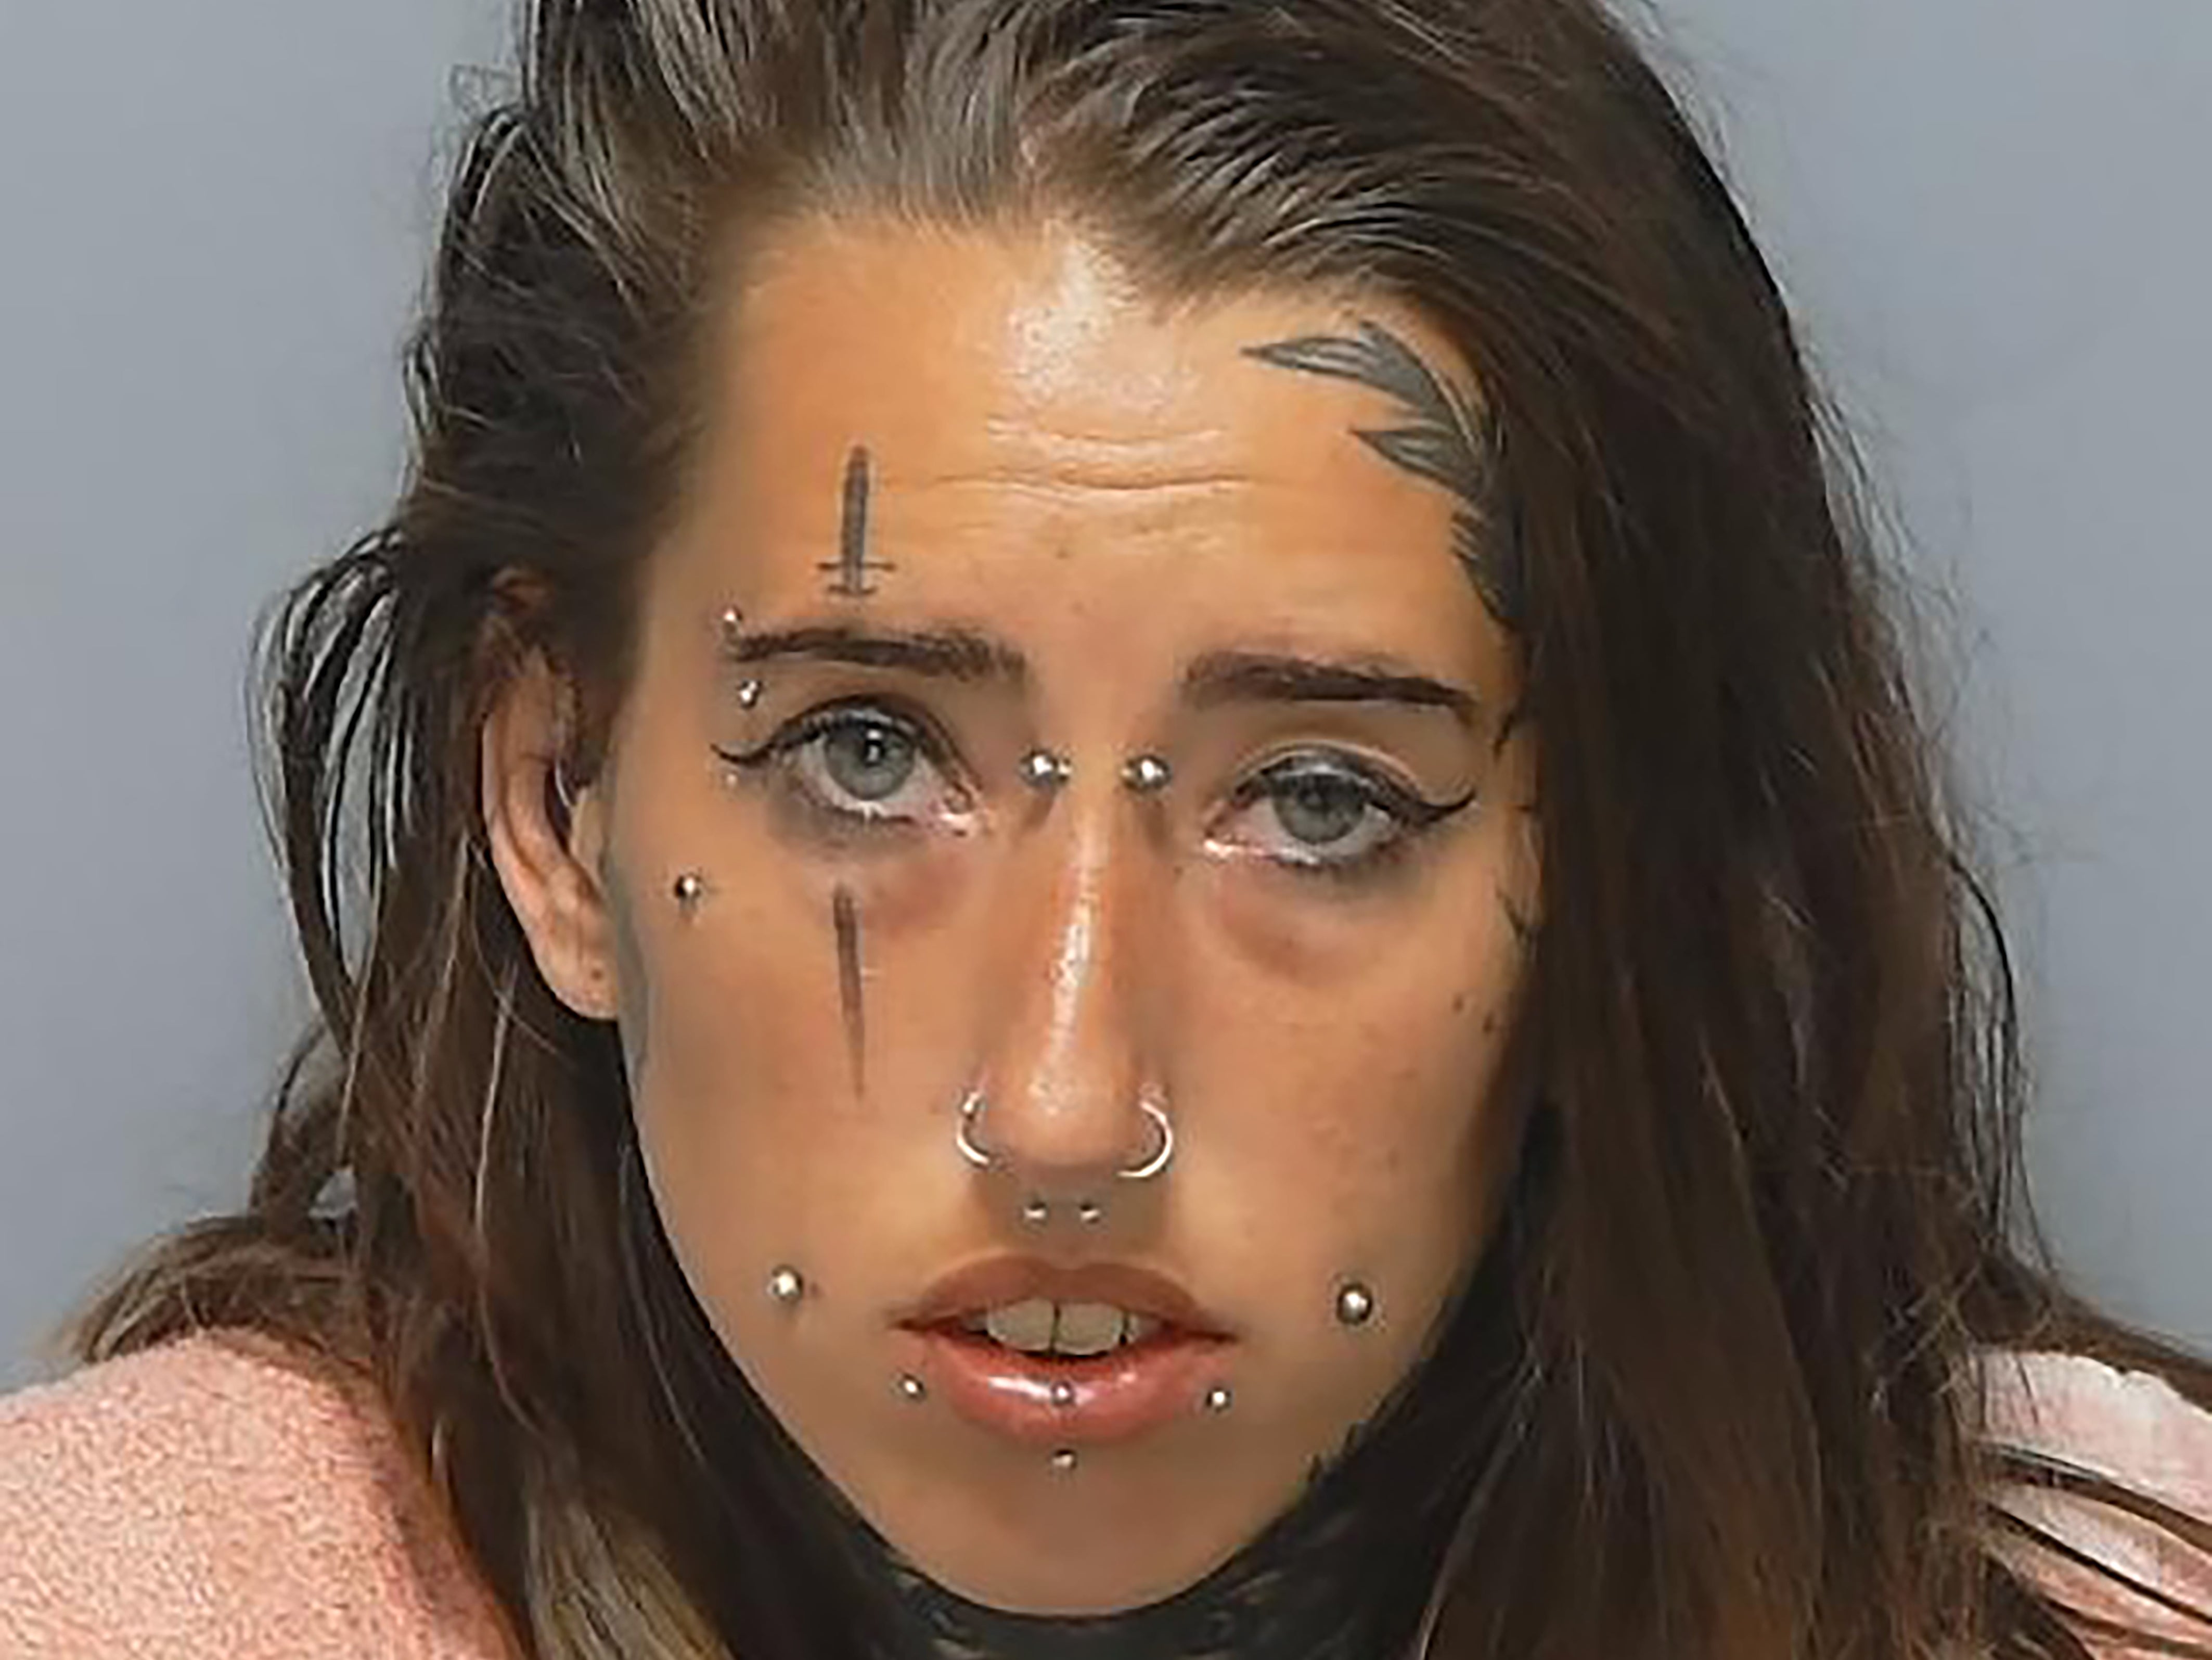 Shaye Groves stabbed her on-off boyfriend 17 times, a court heard